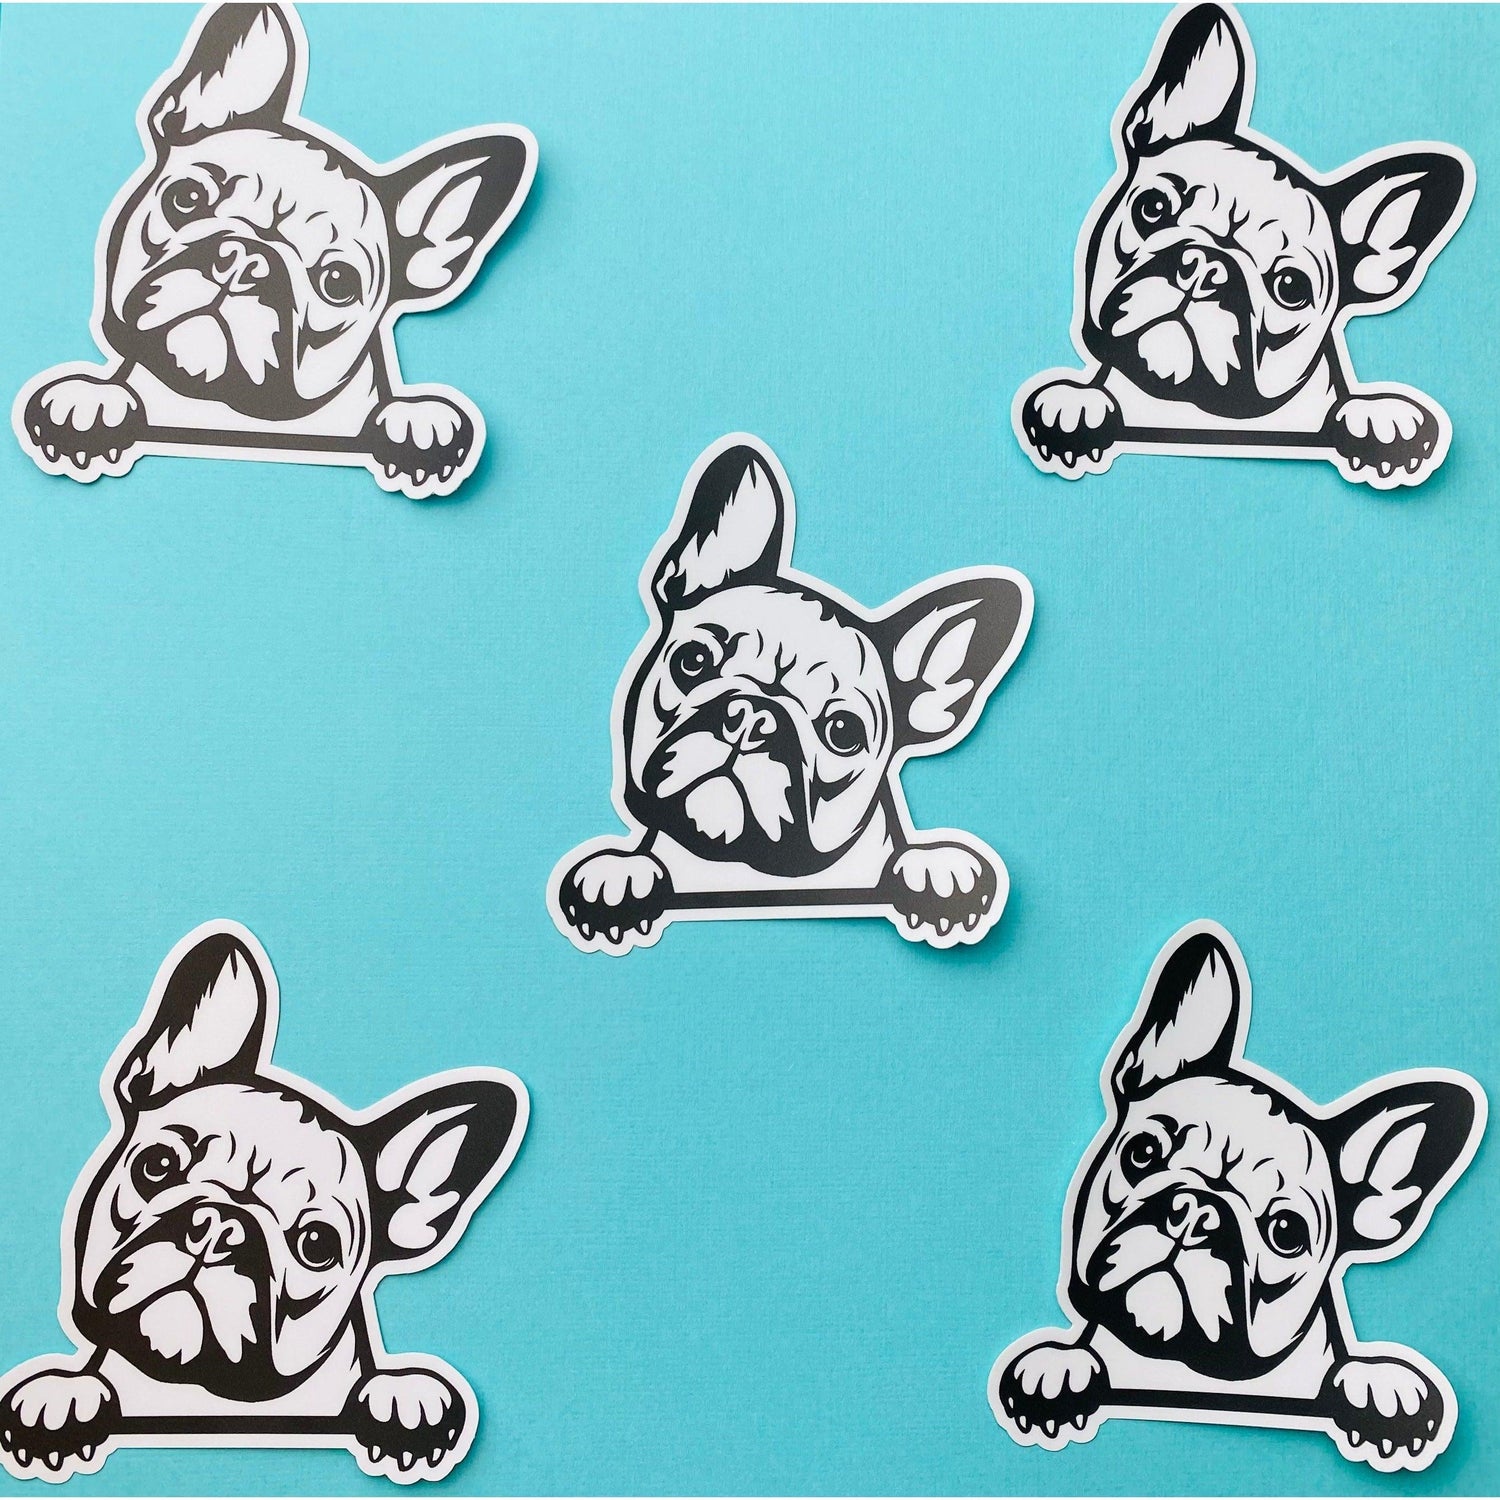 French Bulldog Sticker Black & White Frenchie Bulldog Head Paws Dog Decal for Car, Water Bottle - Ottos Grotto :: Stickers For Your Stuff